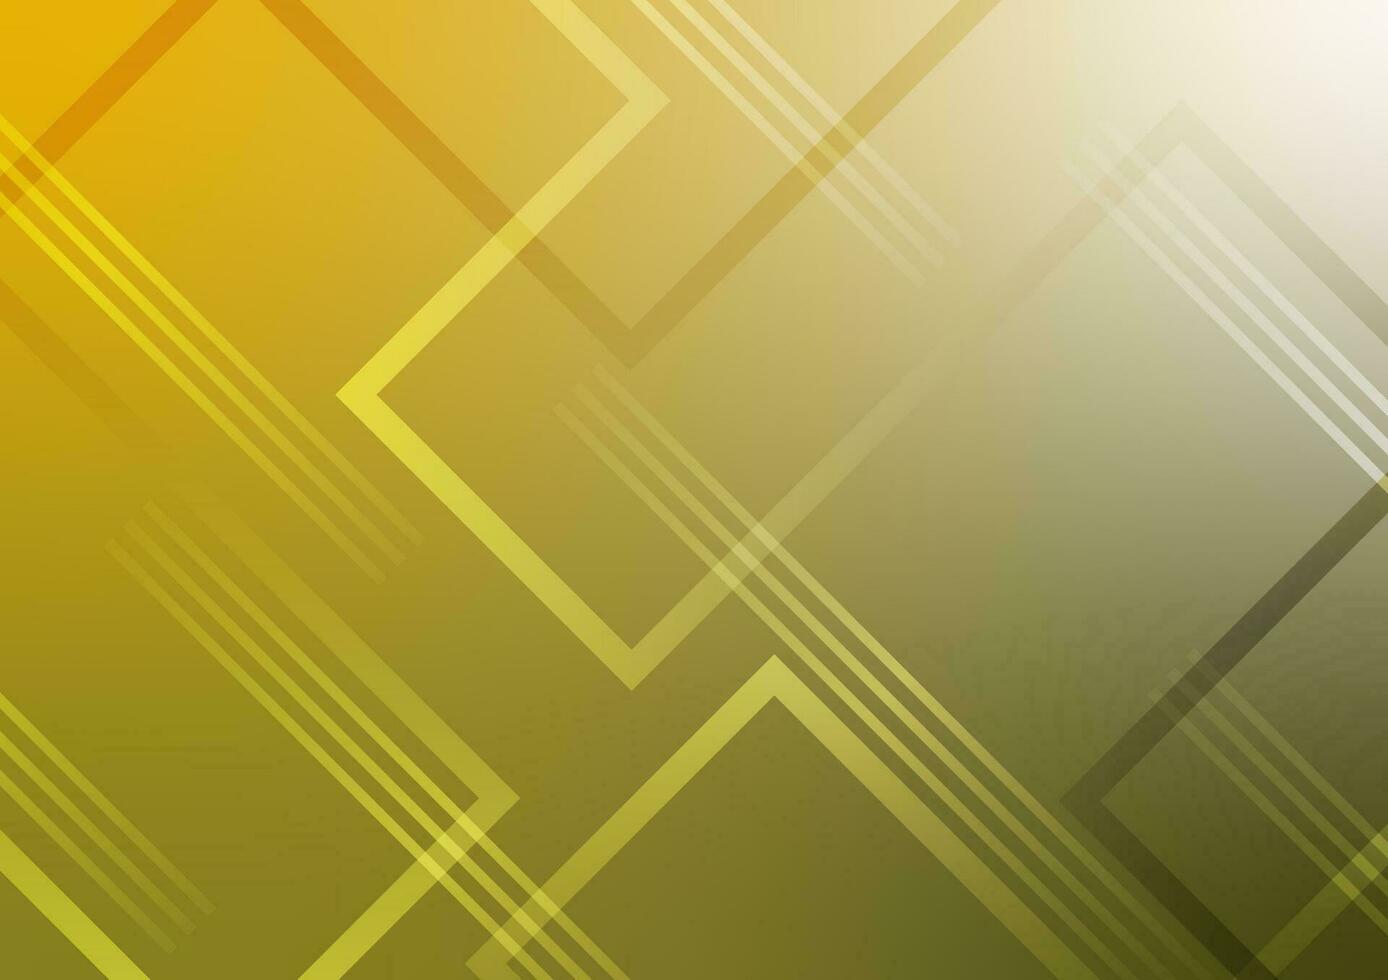 Abstract modern yellow graphic line presentation premium background vector